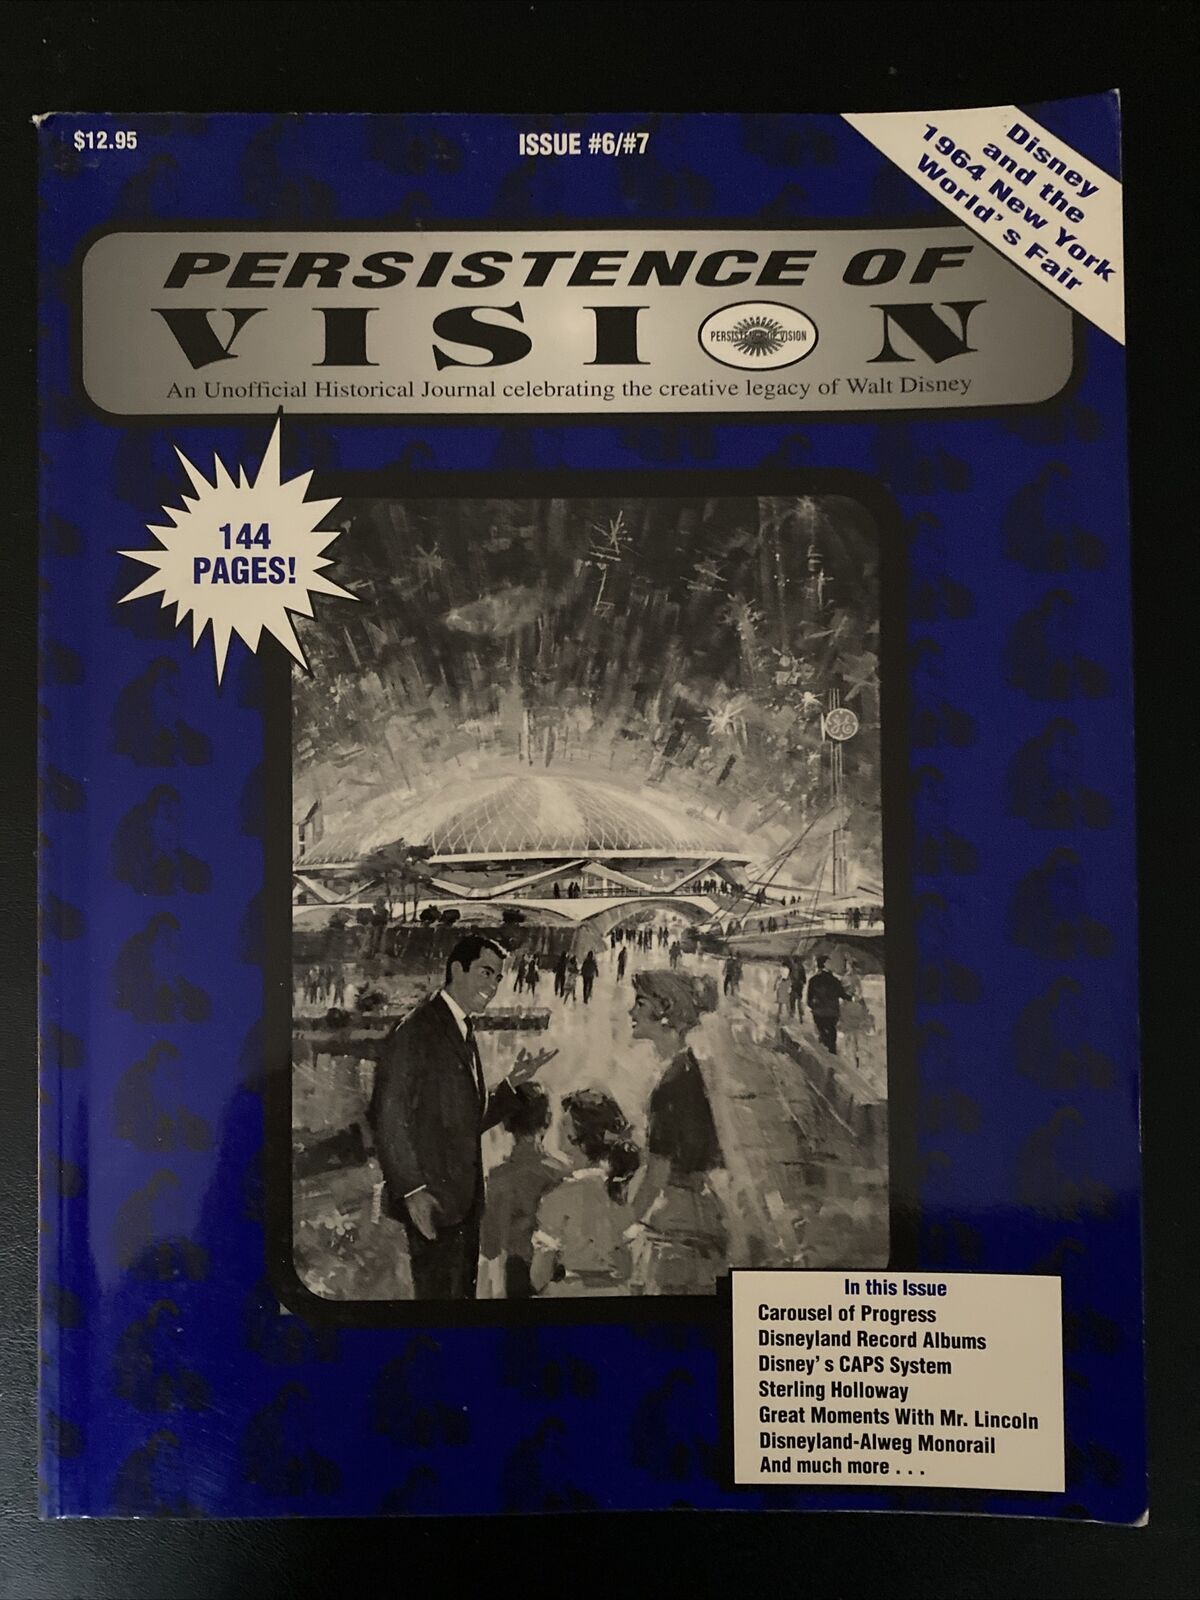 Walt Disney History Persistence of Vision Journal 1964 NY World's Fair ISSUE 6/7